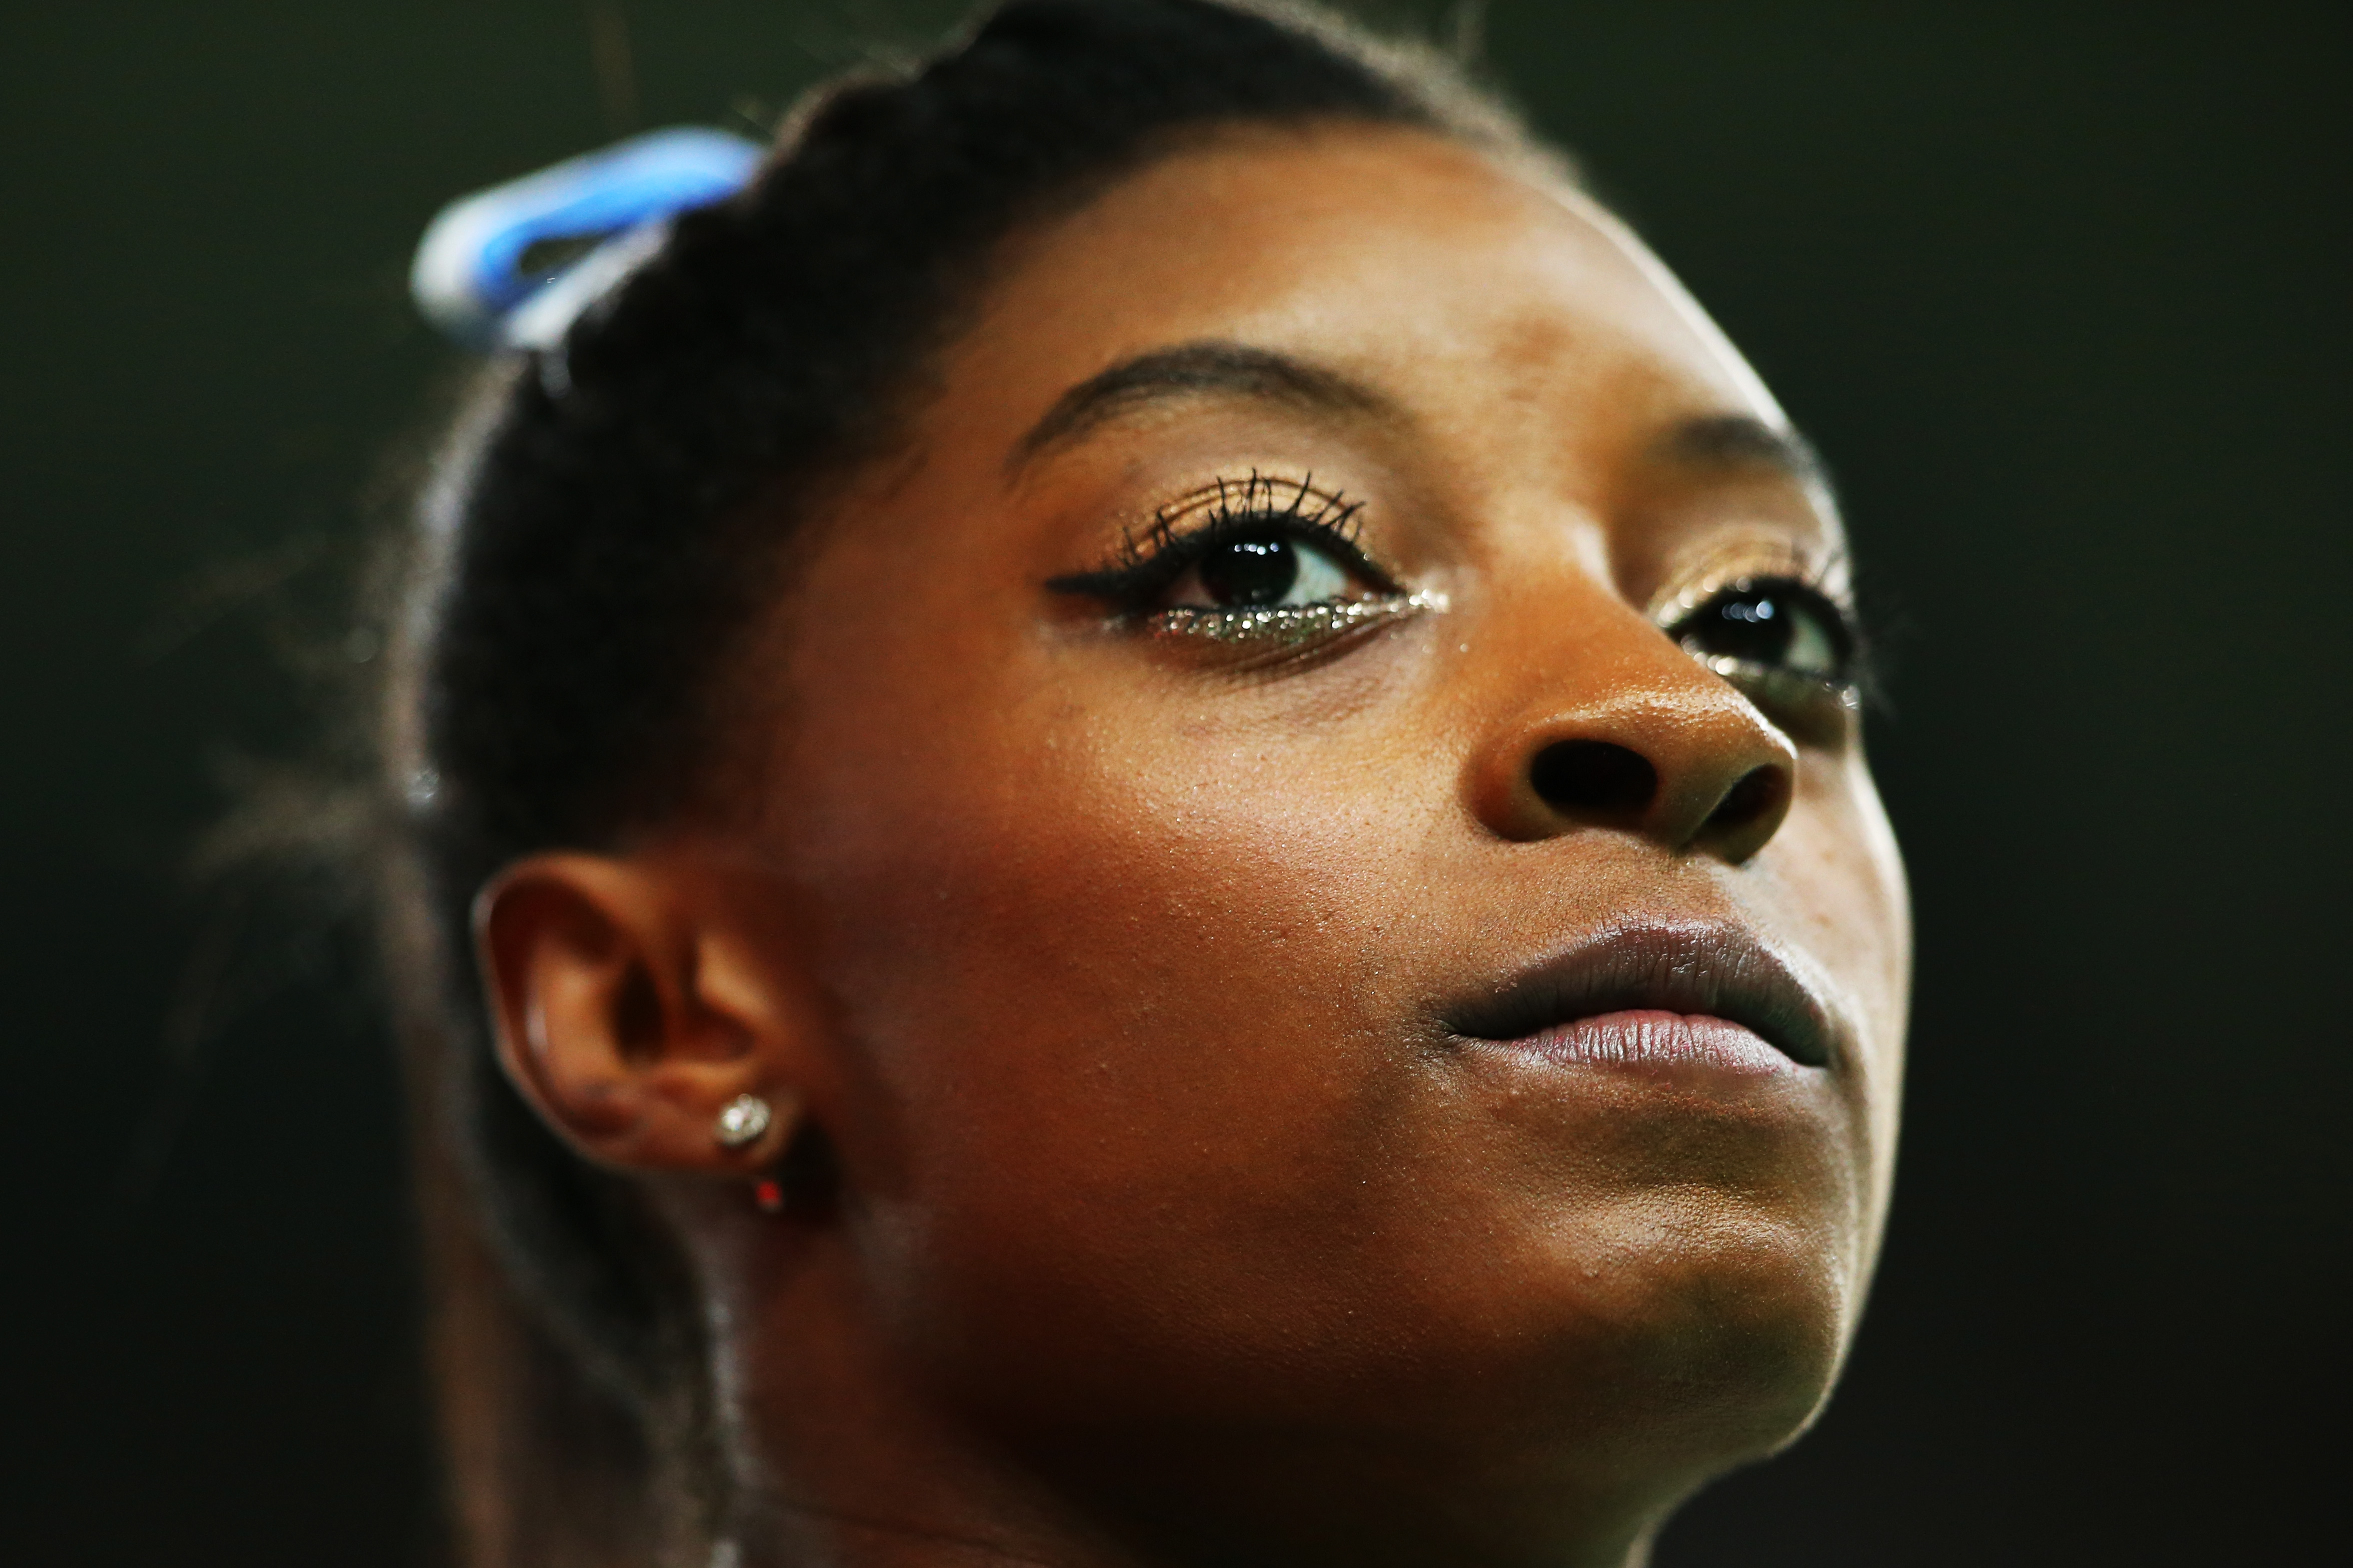 Simone Biles of the United States looks on during the Women's Individual All Around Final on Day 6 of the 2016 Rio Olympics at Rio Olympic Arena, on August 11, 2016, in Rio de Janeiro, Brazil. | Source: Getty Images